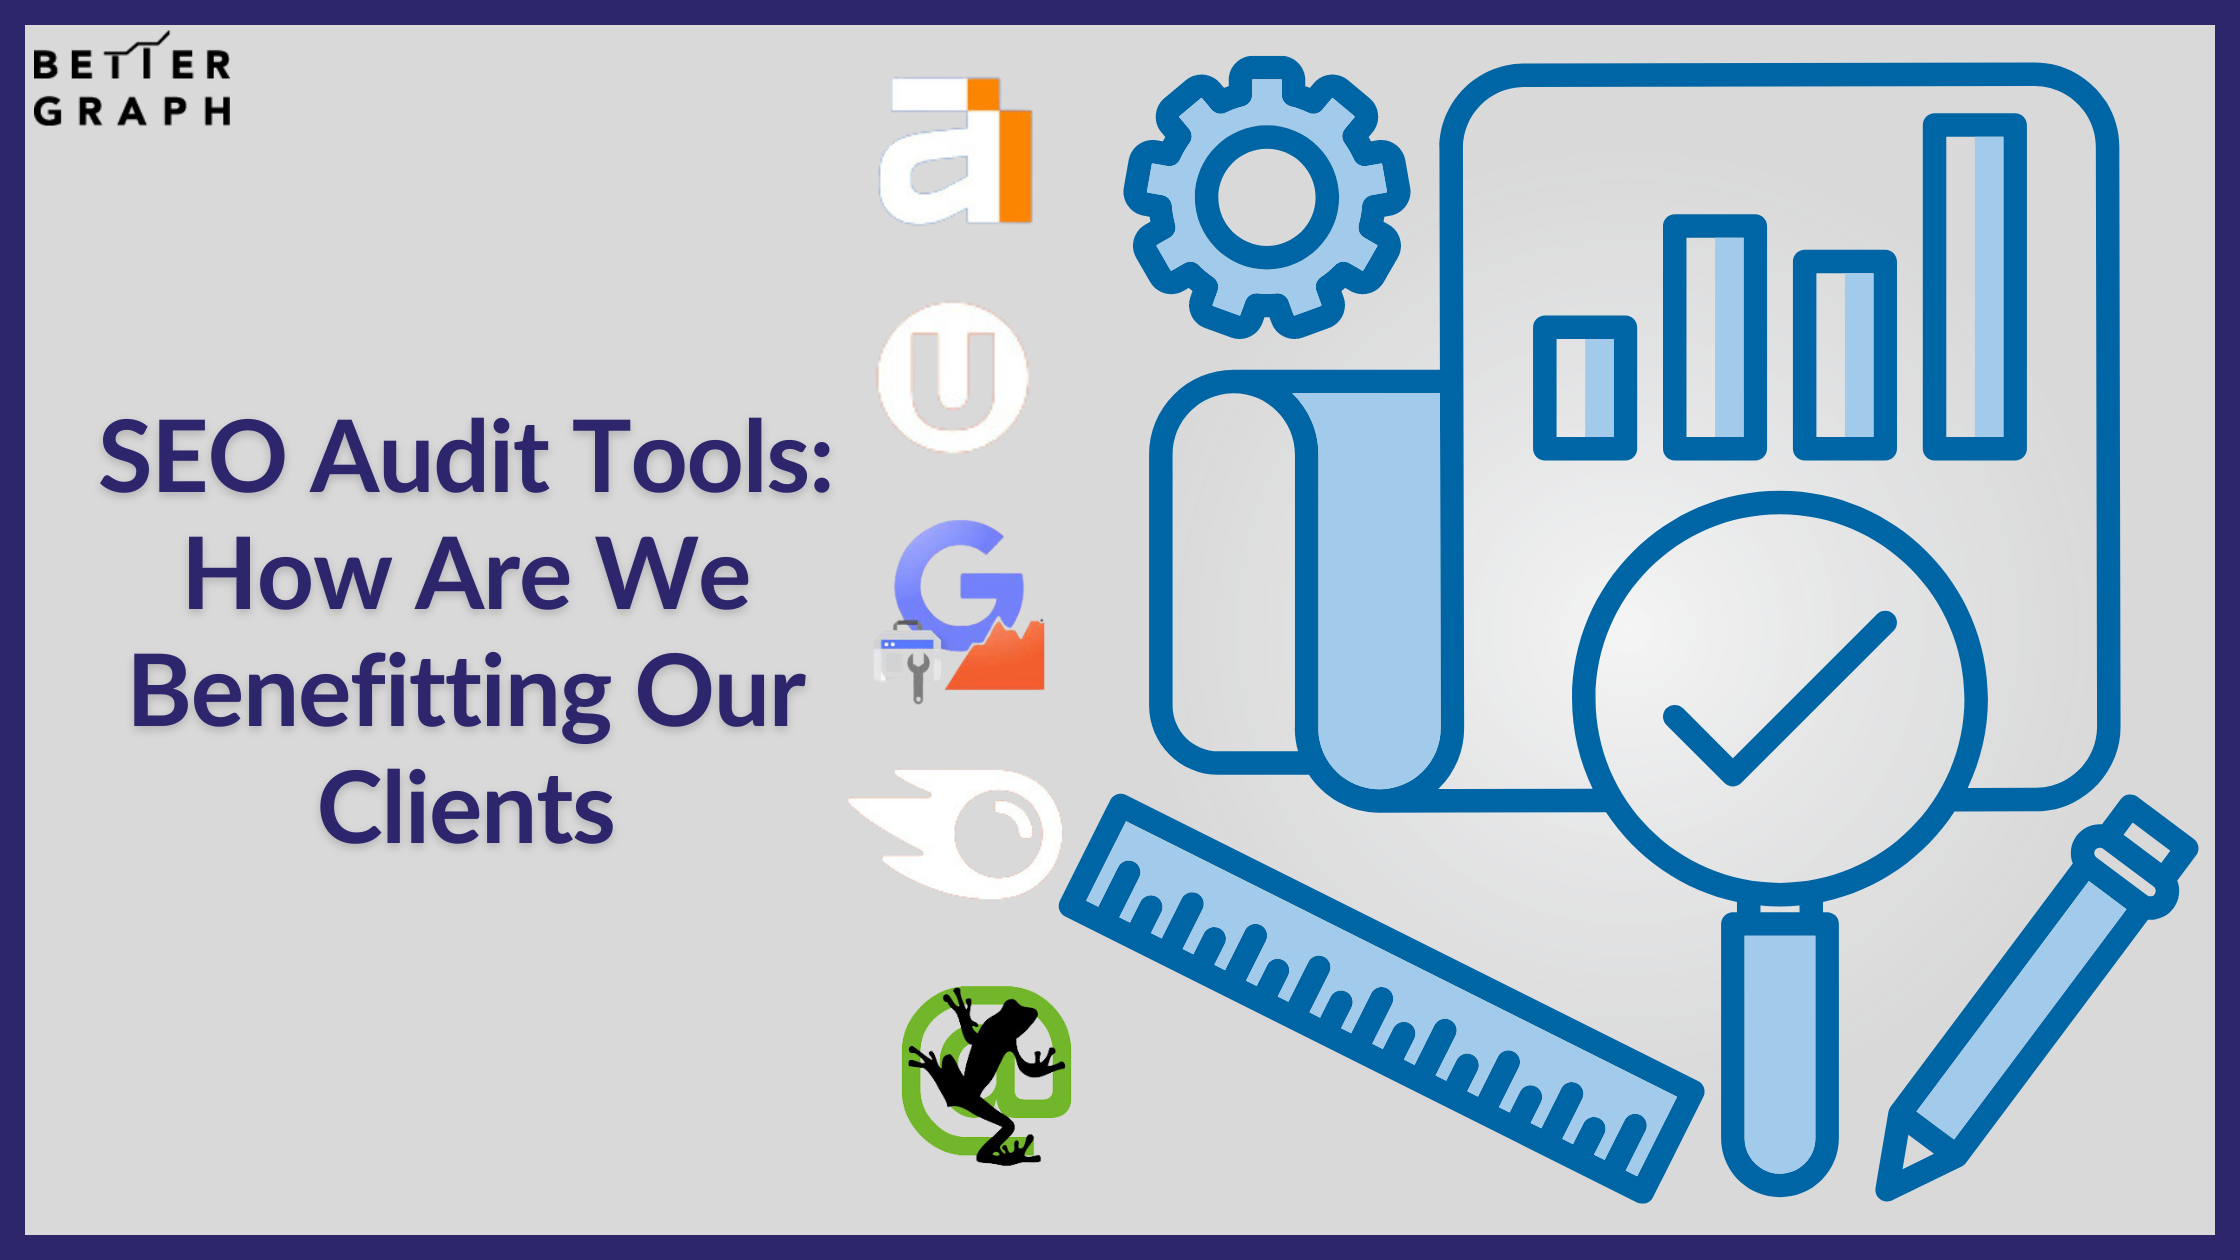 SEO Audit Tools How Are We Benefitting Our Clients (1).png  by BetterGraph